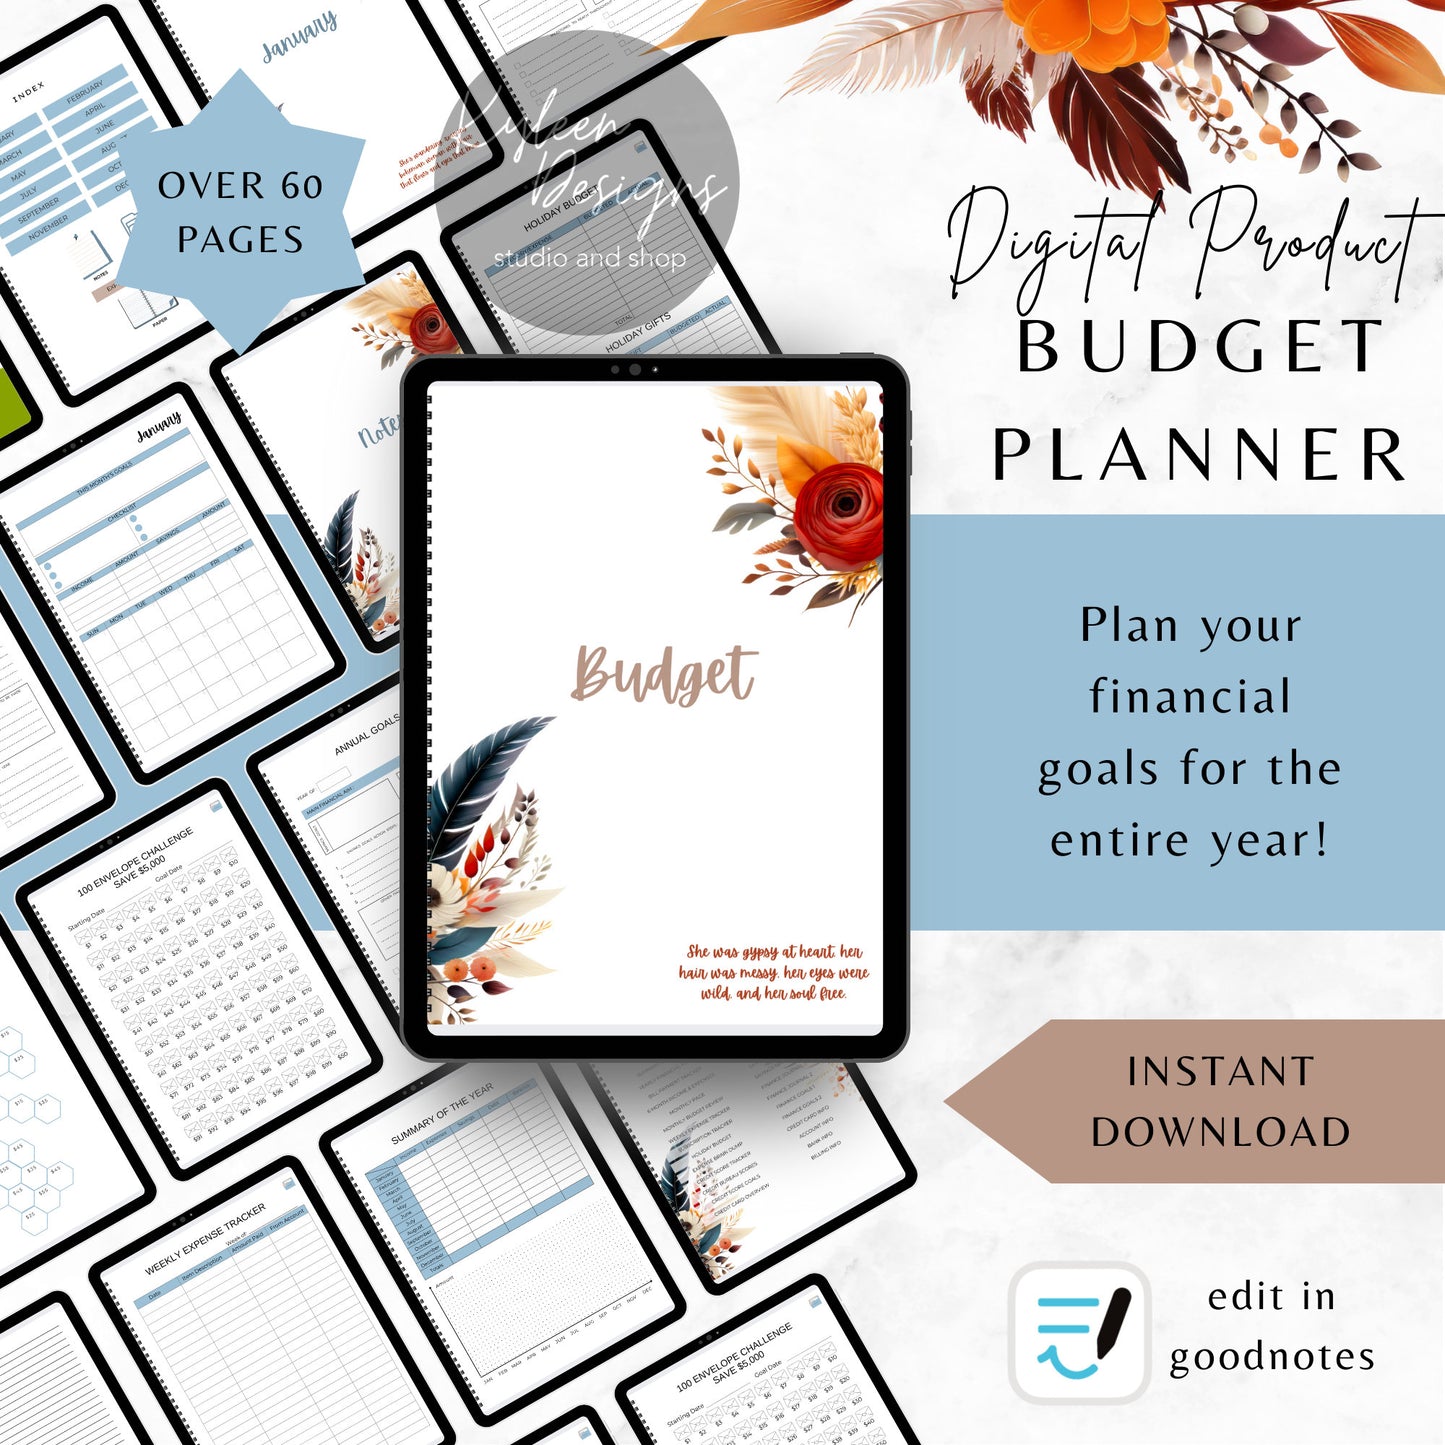 Boho Budget Planner, PDF download, edit in goodnotes, over 60 pages!  This is a DIGITAL ITEM!   Super Easy!  Exclusive Design